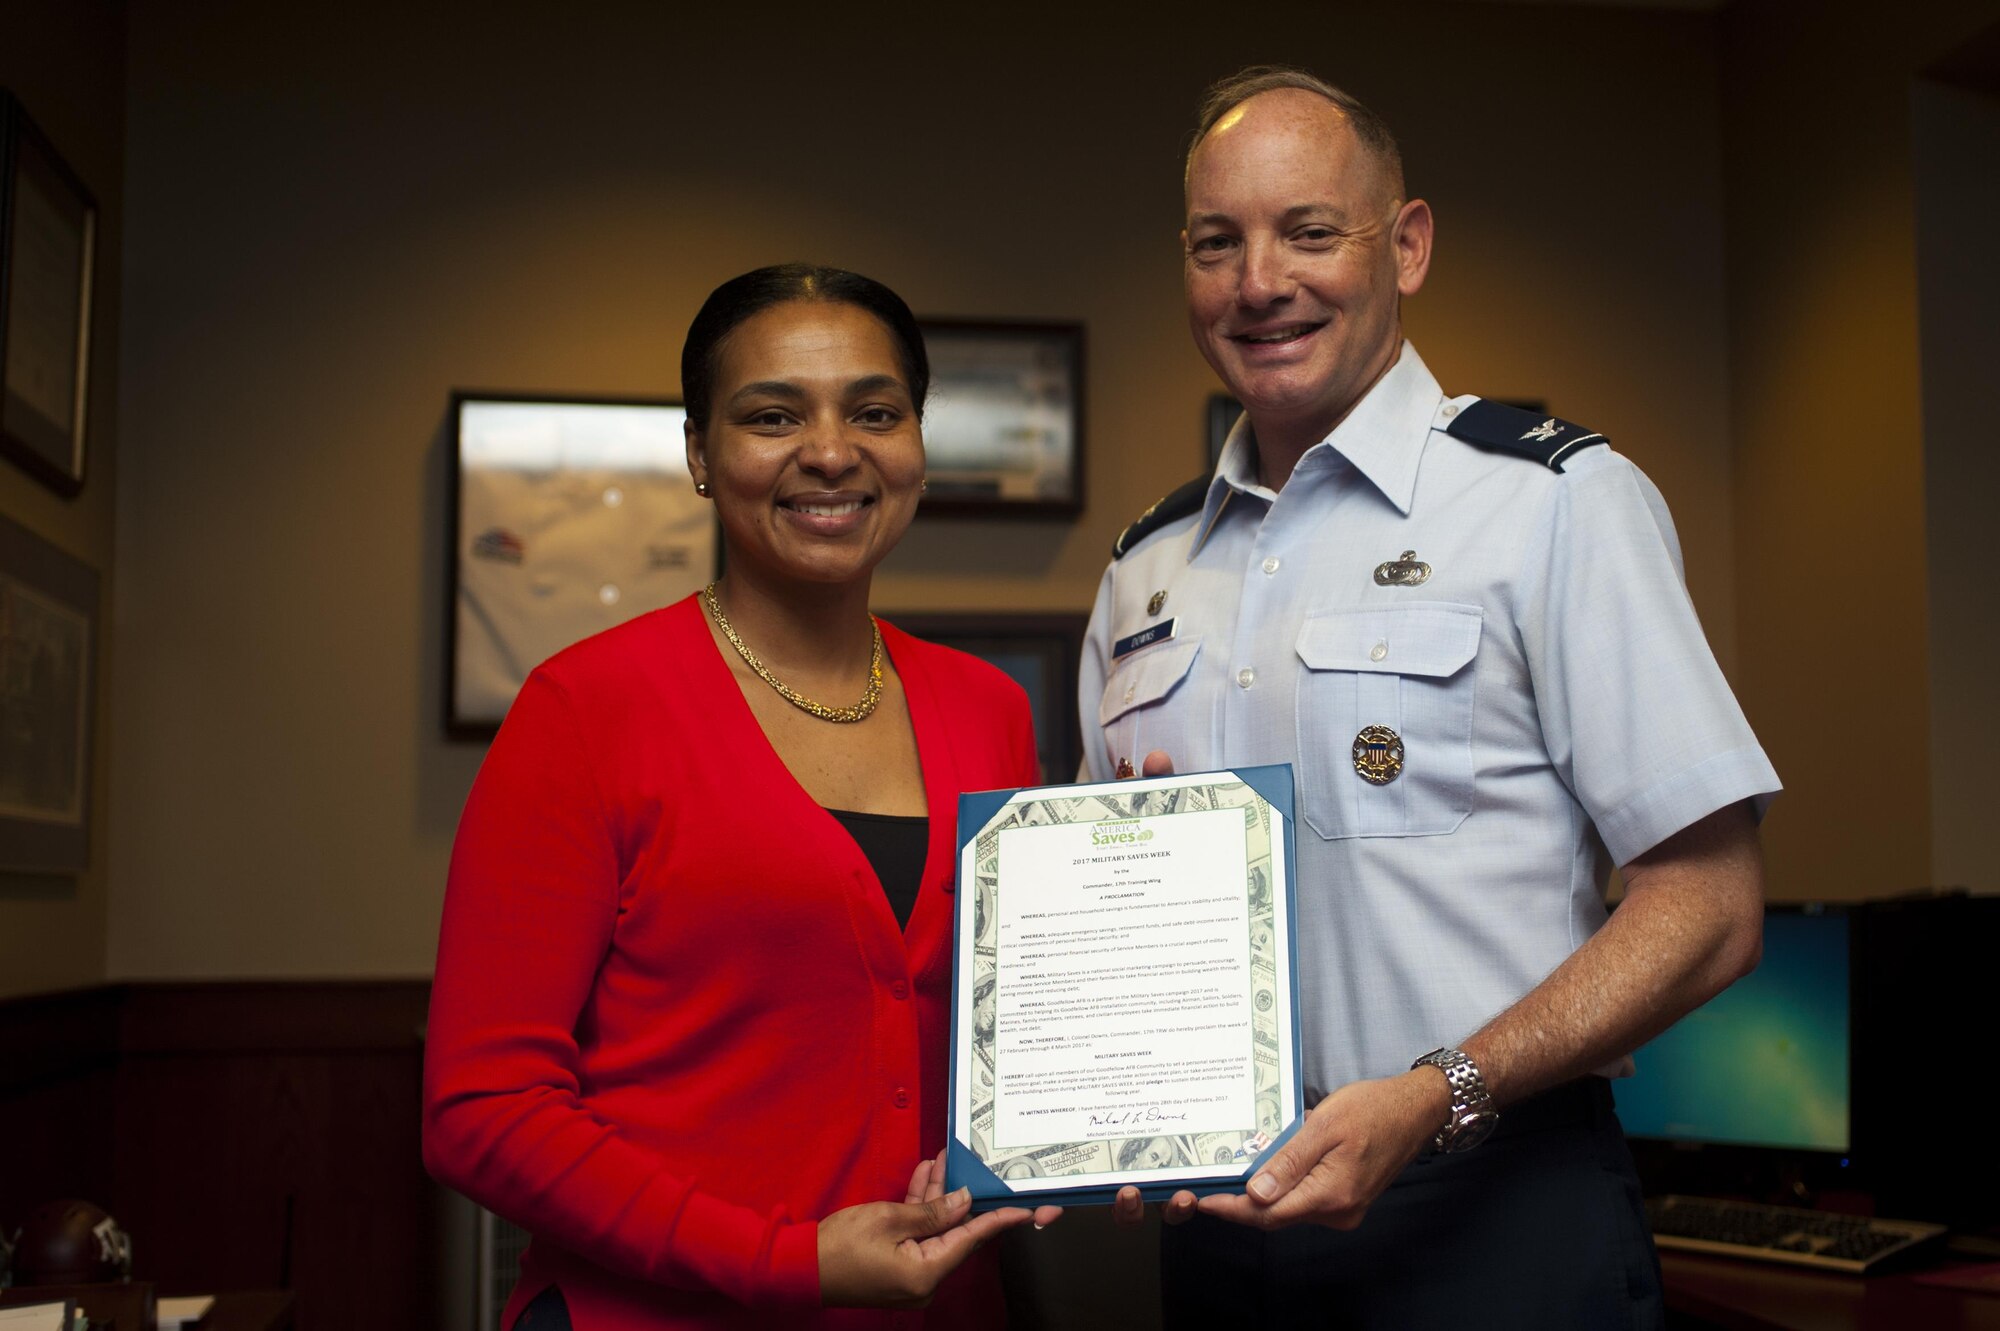 Qiana Woods, 17th Force Support Squadron Airman and Family Readiness Center work-life consultant, and Col. Michael Downs, 17th Training Wing Commander, present the Military Saves memorandum of understanding in the Norma Brown building on Goodfellow Air Force Base, Texas, February 28, 2017. Month of Military Saves is a campaign dedicated to encouraging military members to save money and set financial goals. (U.S. Air Force photo by Senior Airman Scott Jackson/Released)